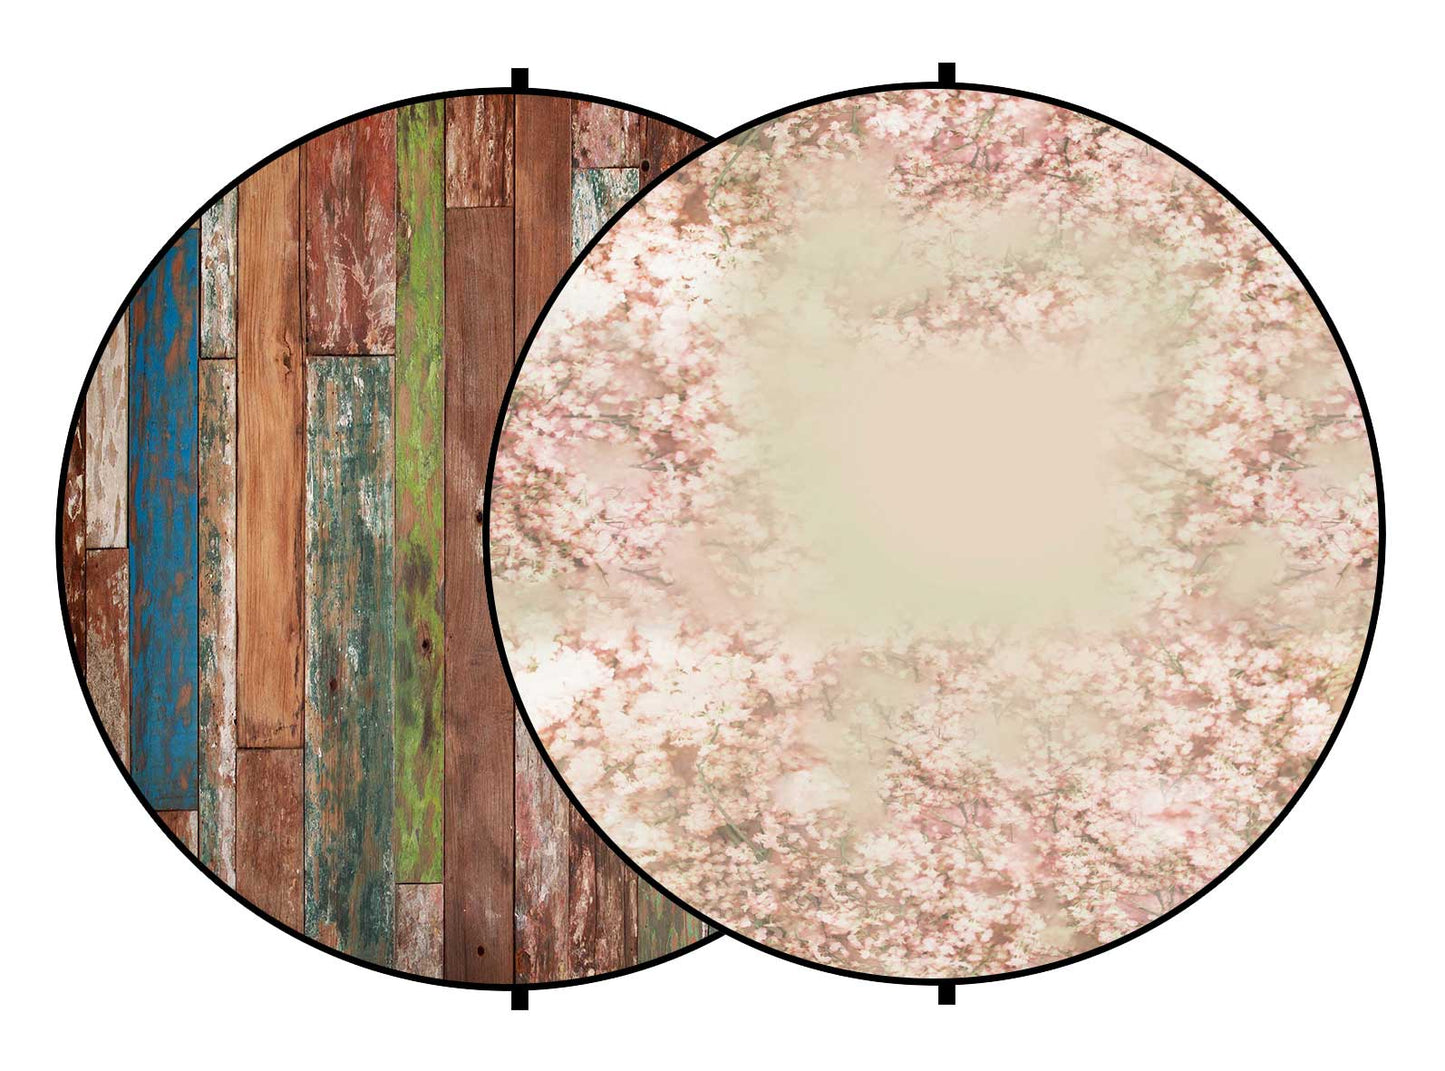 Fox Retro Wood/Flowers Collapsible Photography Backdrop 5x5ft(1.5x1.5m) - Foxbackdrop